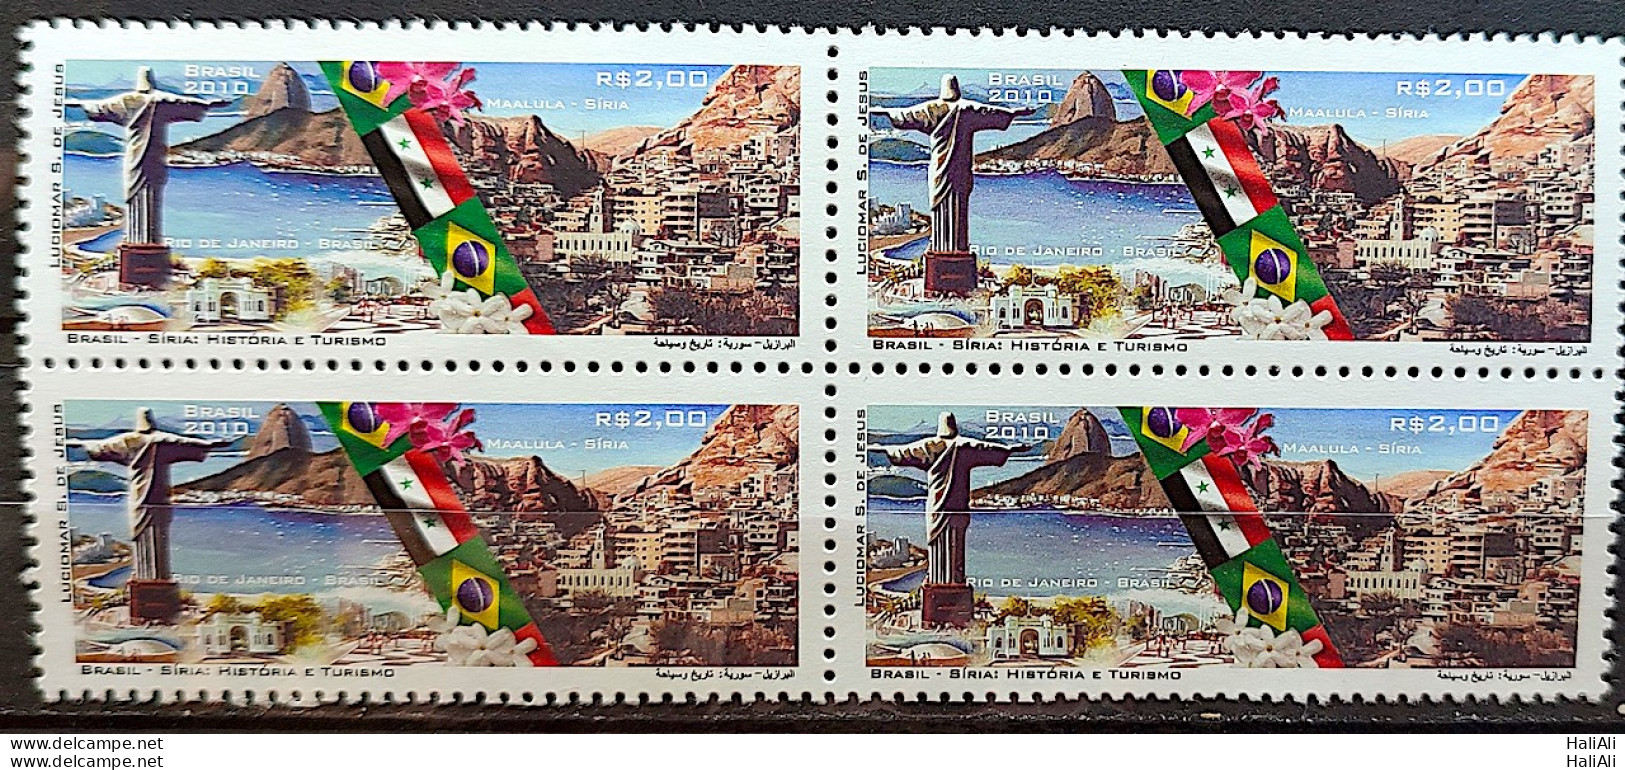 C 2983 Brazil Stamp Diplomatic Relations Syria Christ The Redeemer RJ Flag 2010 Block Of 4 - Neufs